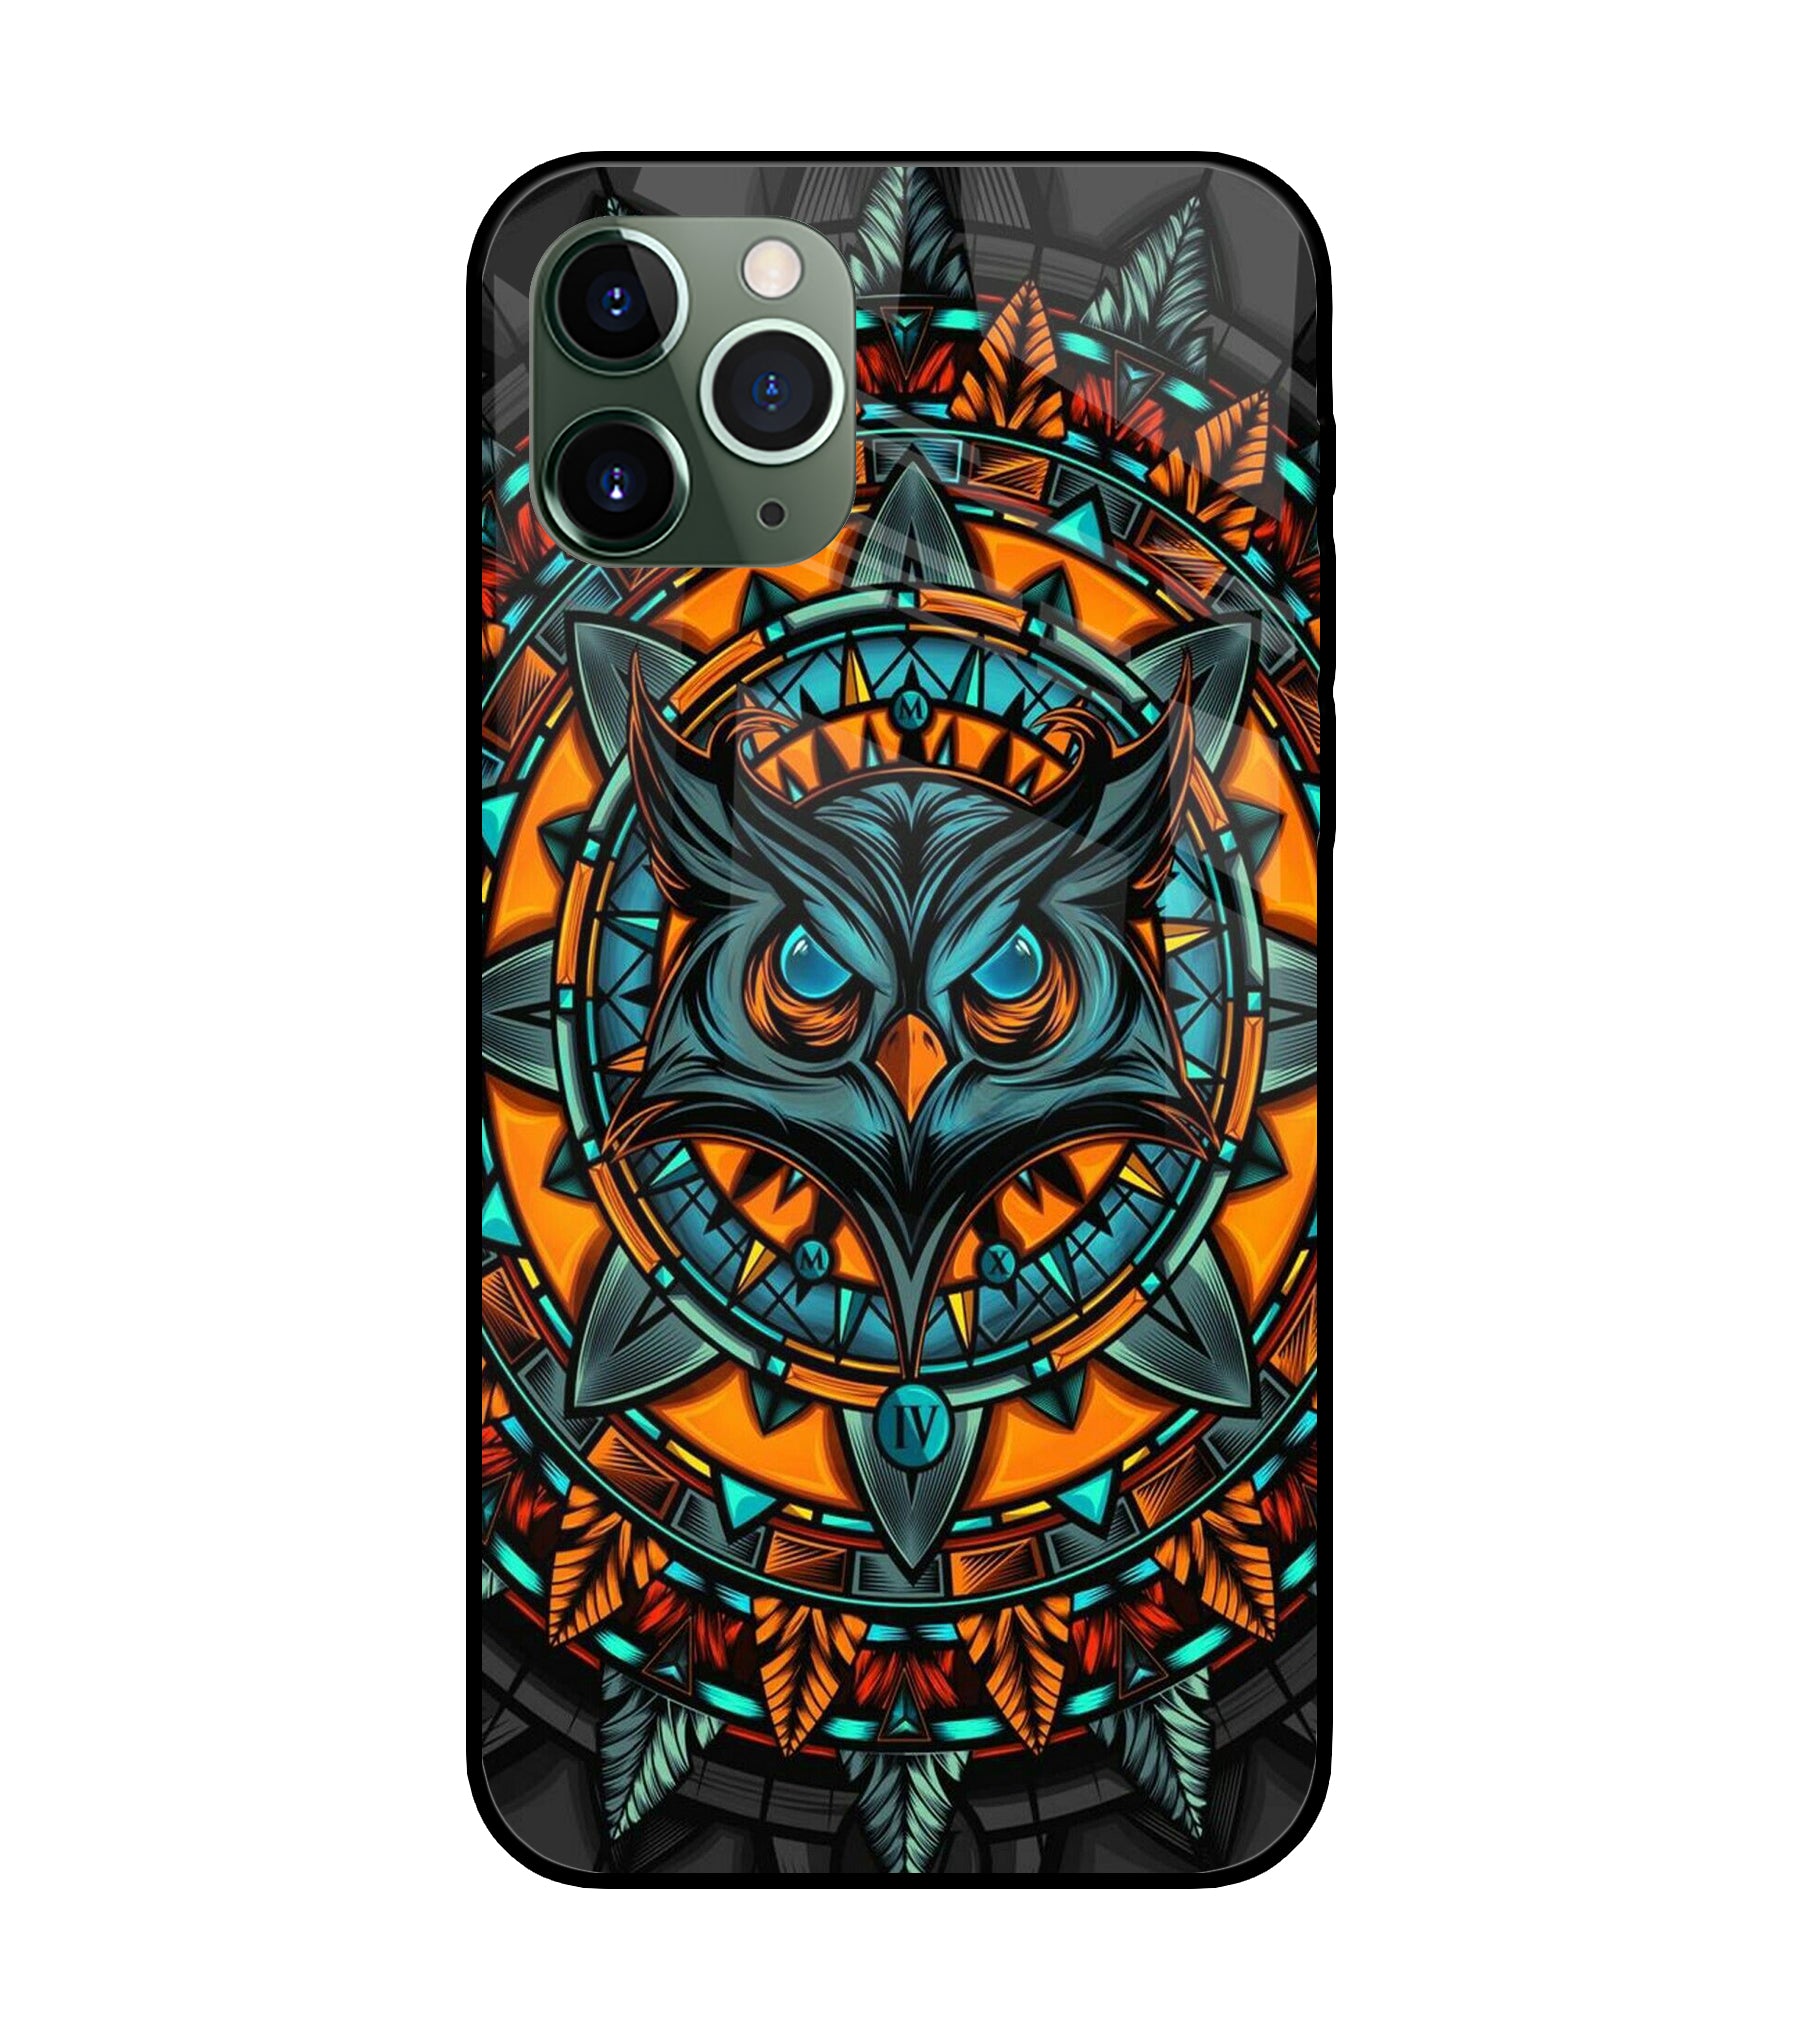 Angry Owl Art iPhone 11 Pro Max Glass Cover